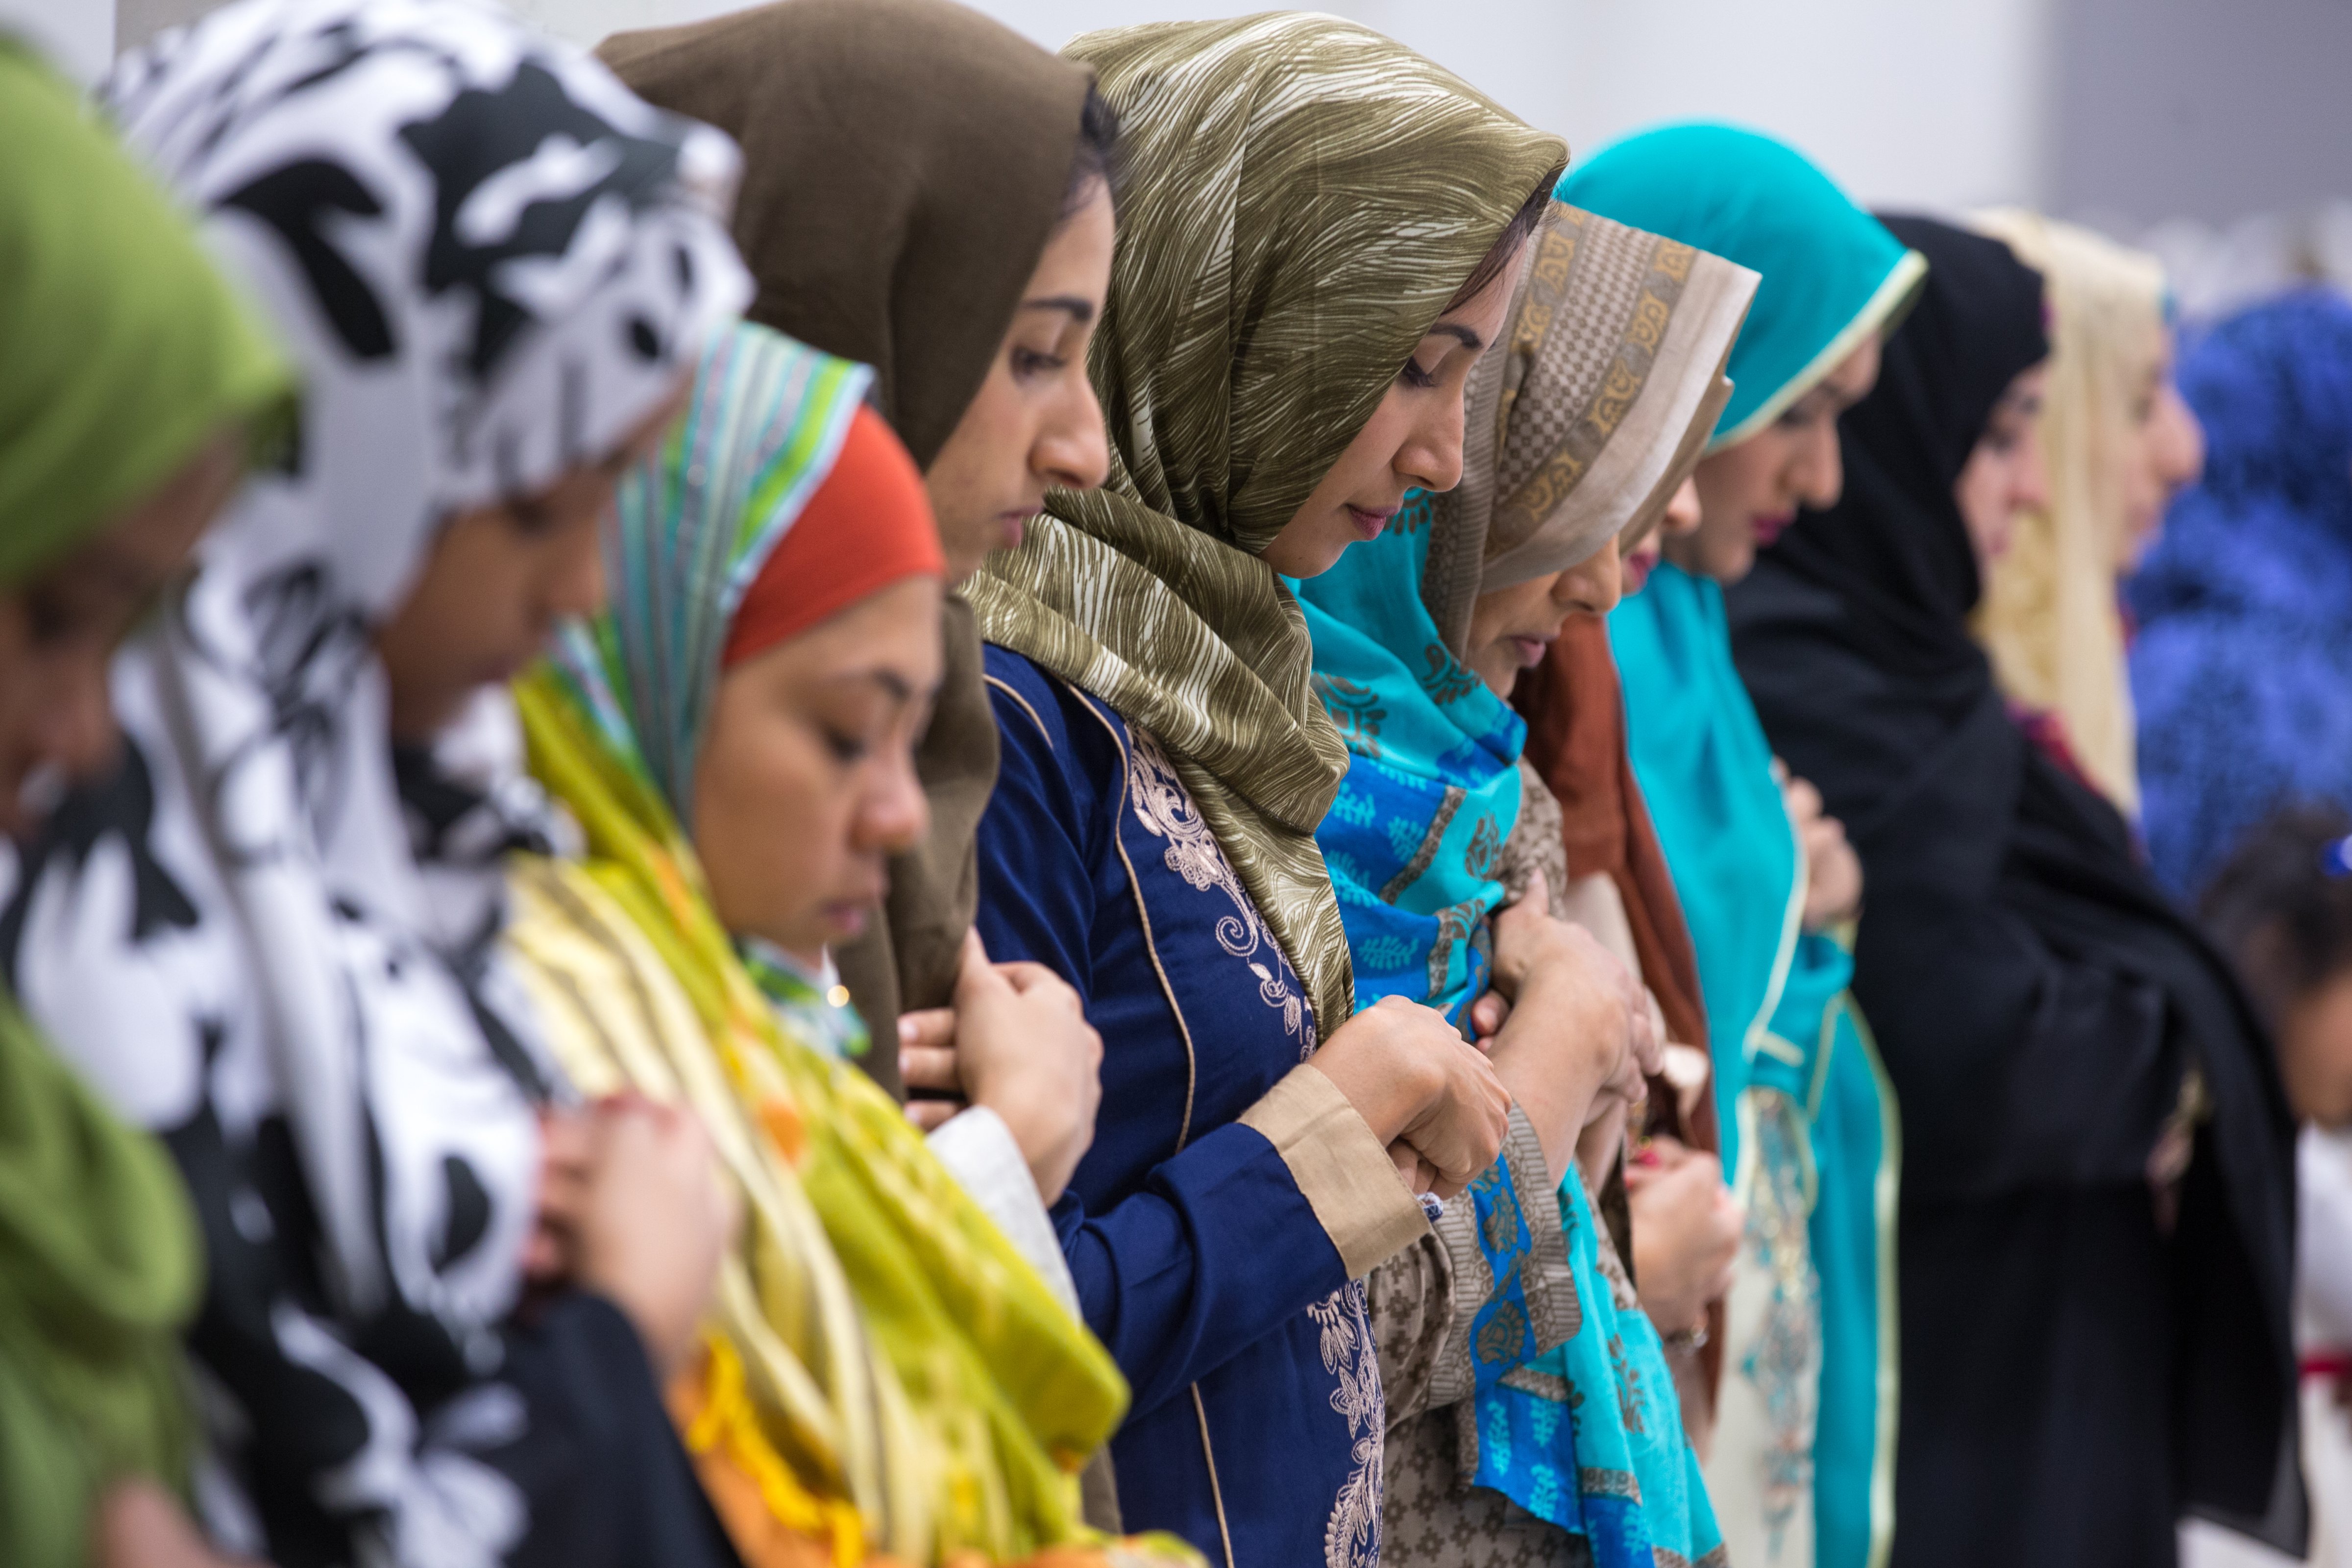 Muslims pray at the Dulles Expo Center during Eid al-Adha, the "Feast of the Sacrifice", in Chantilly, VA on Sept. 12, 2016. (Evelyn Hockstein—The Washington Post/Getty Images)